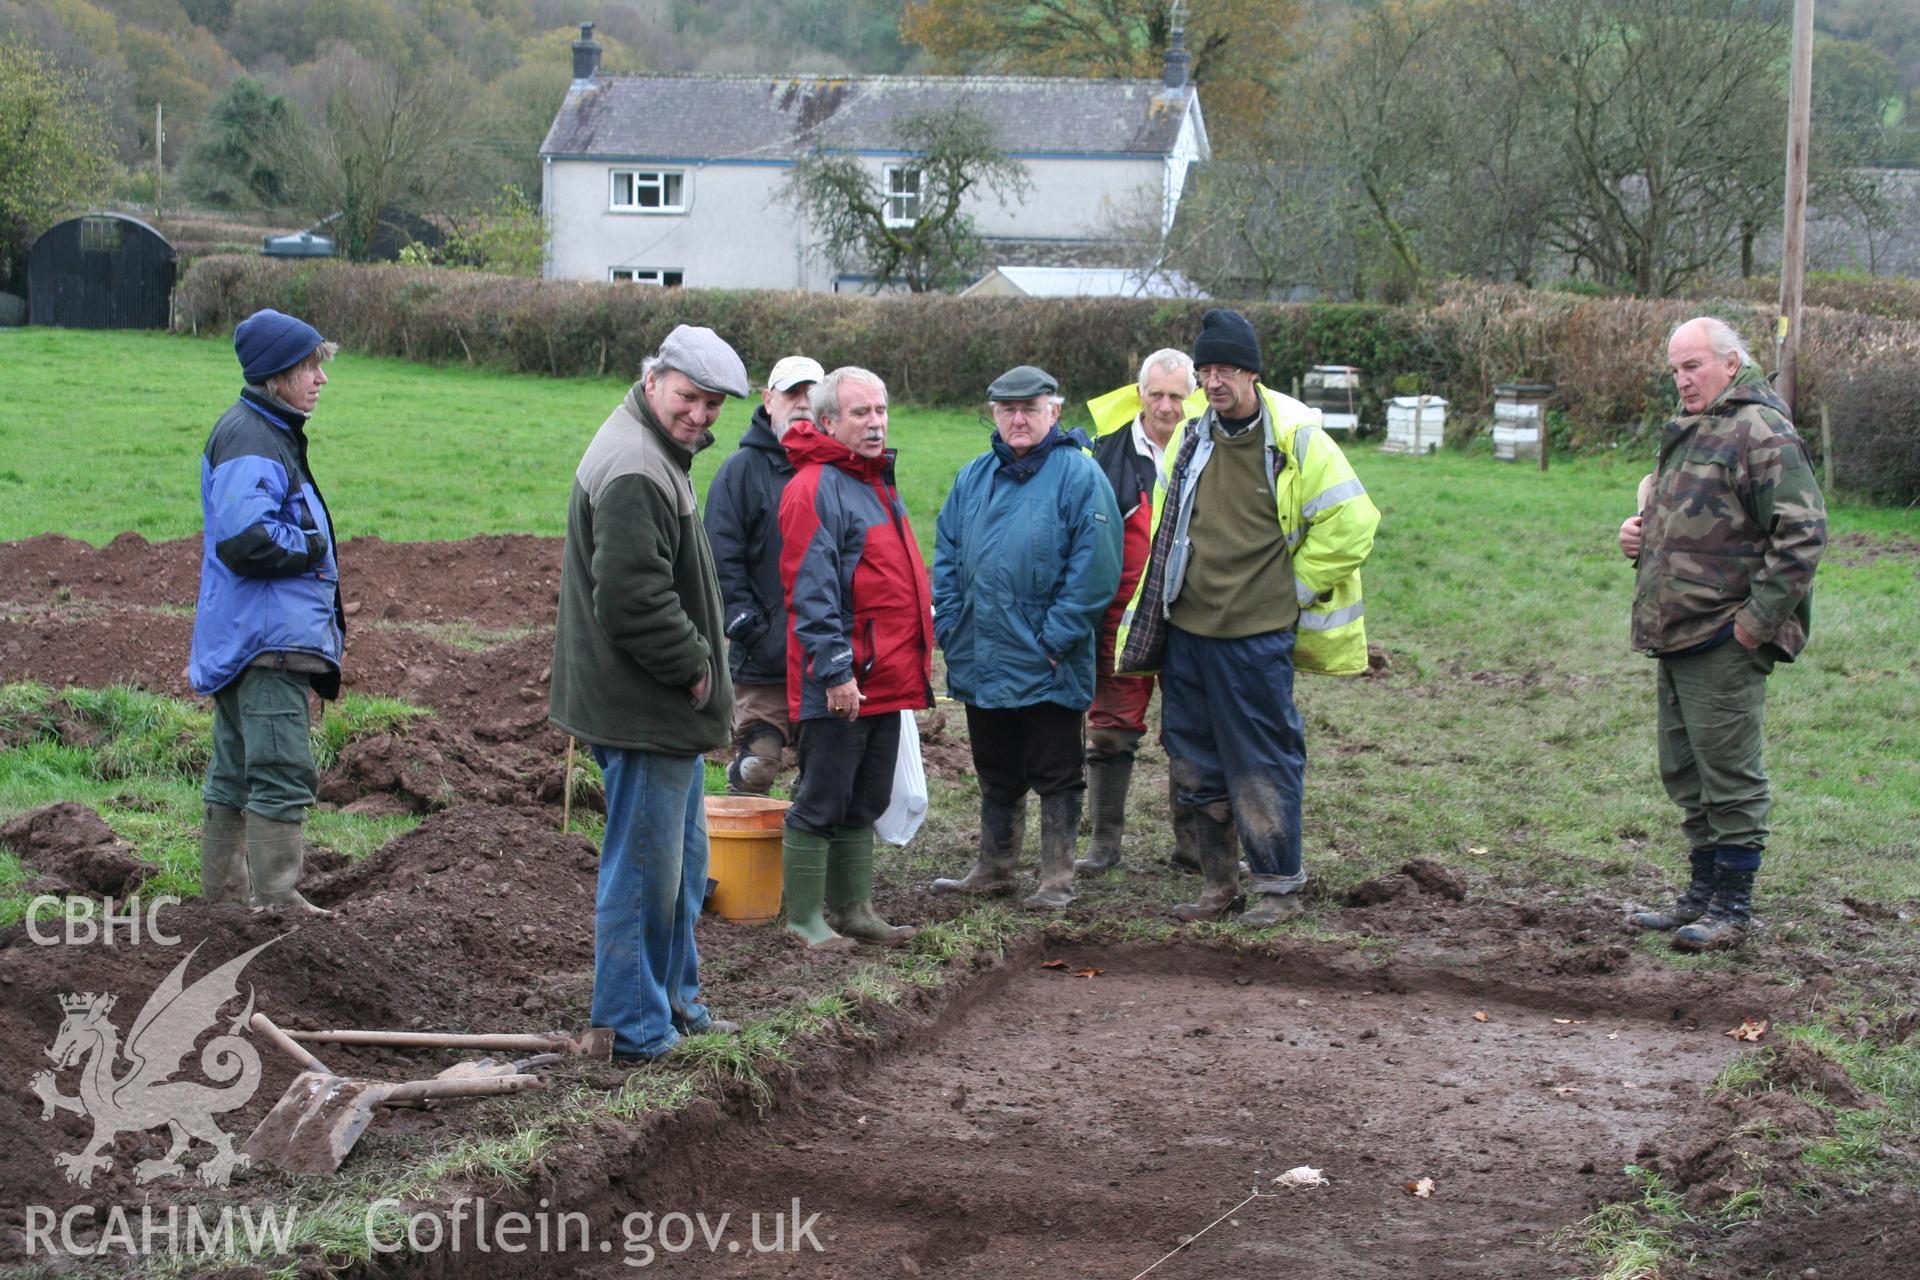 Excavations at Llys Brychan Roman villa by Dyfed Archaeological Trust, 2009.